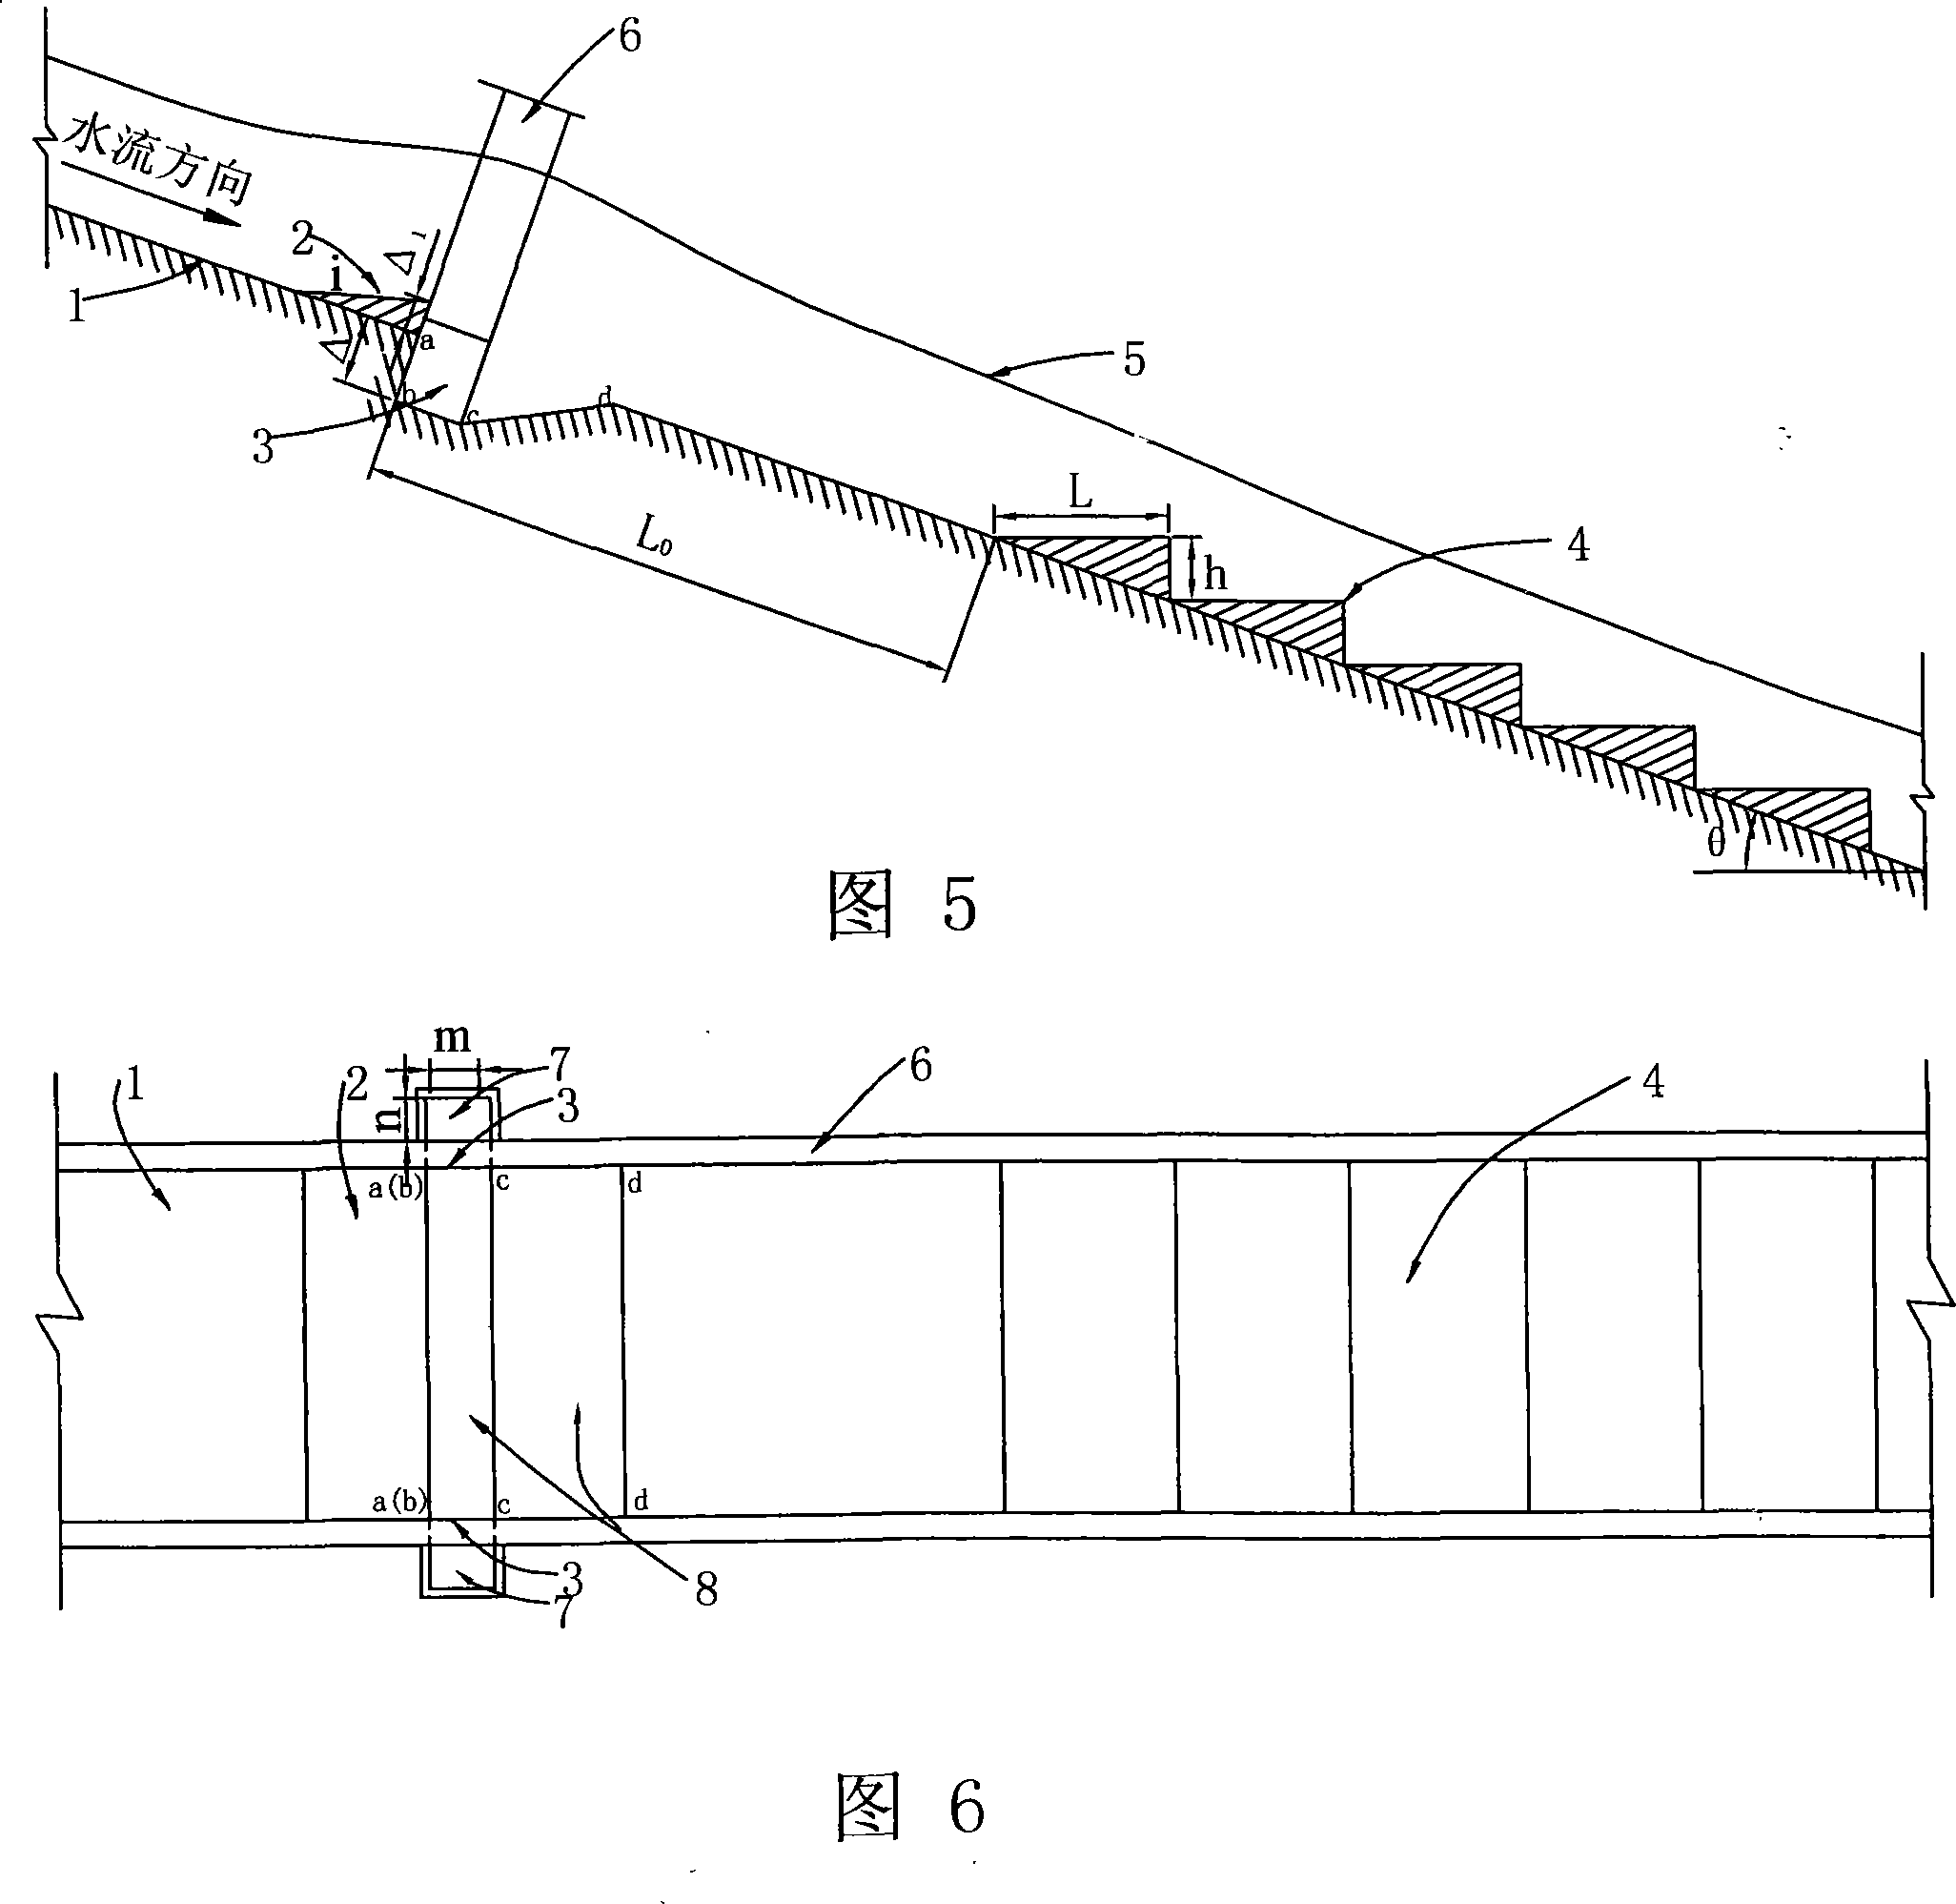 Ladder energy dissipater with doped gas device preposed